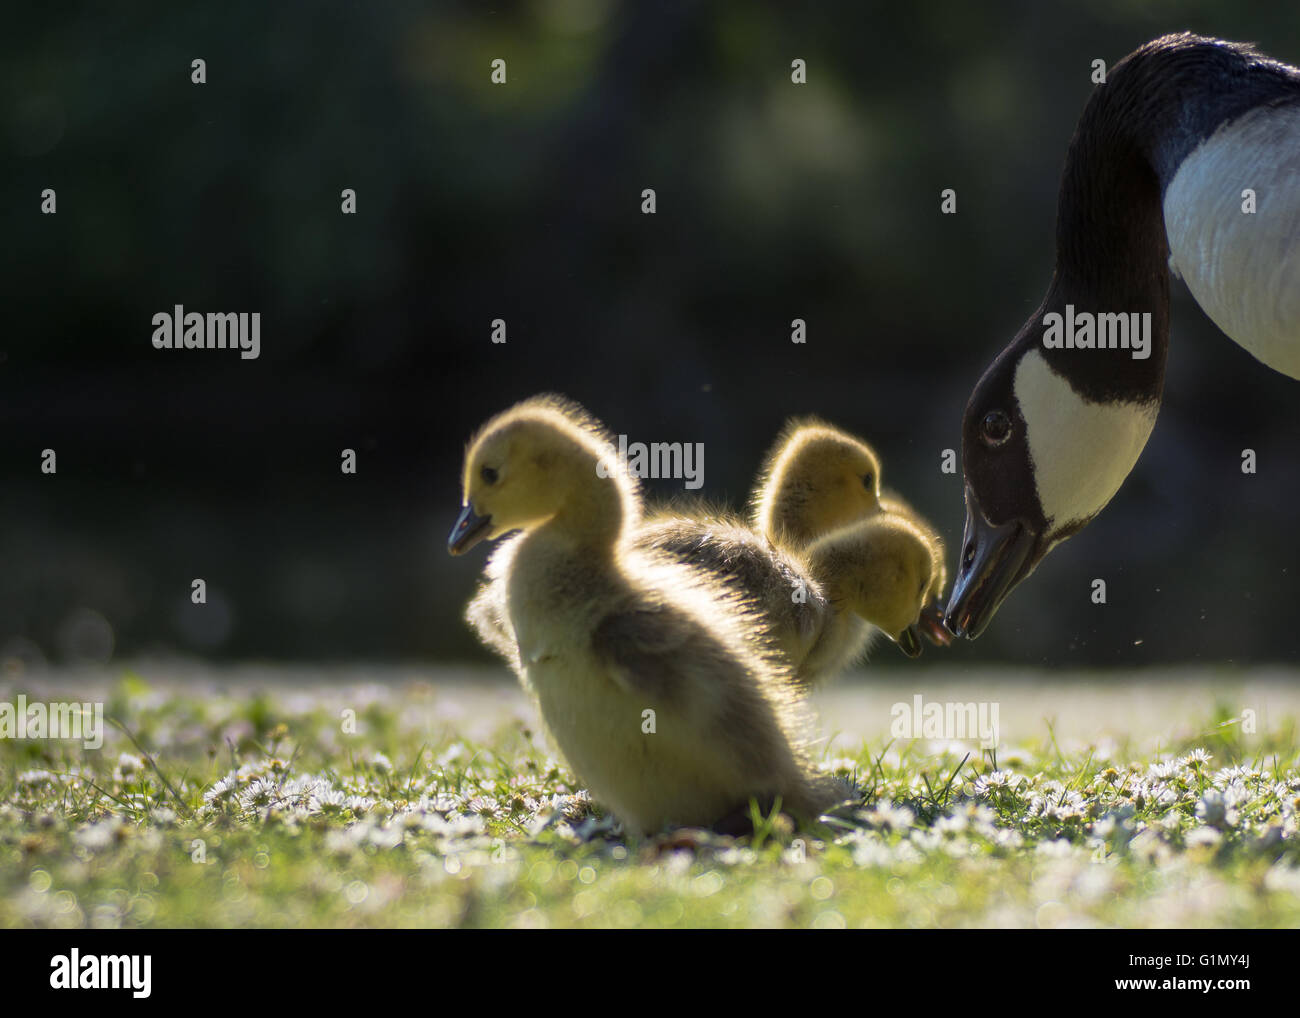 Canada goose (Branta canadensis) parent bird with goslings. Young chicks touching beaks with wild adult, on daisies in grass Stock Photo